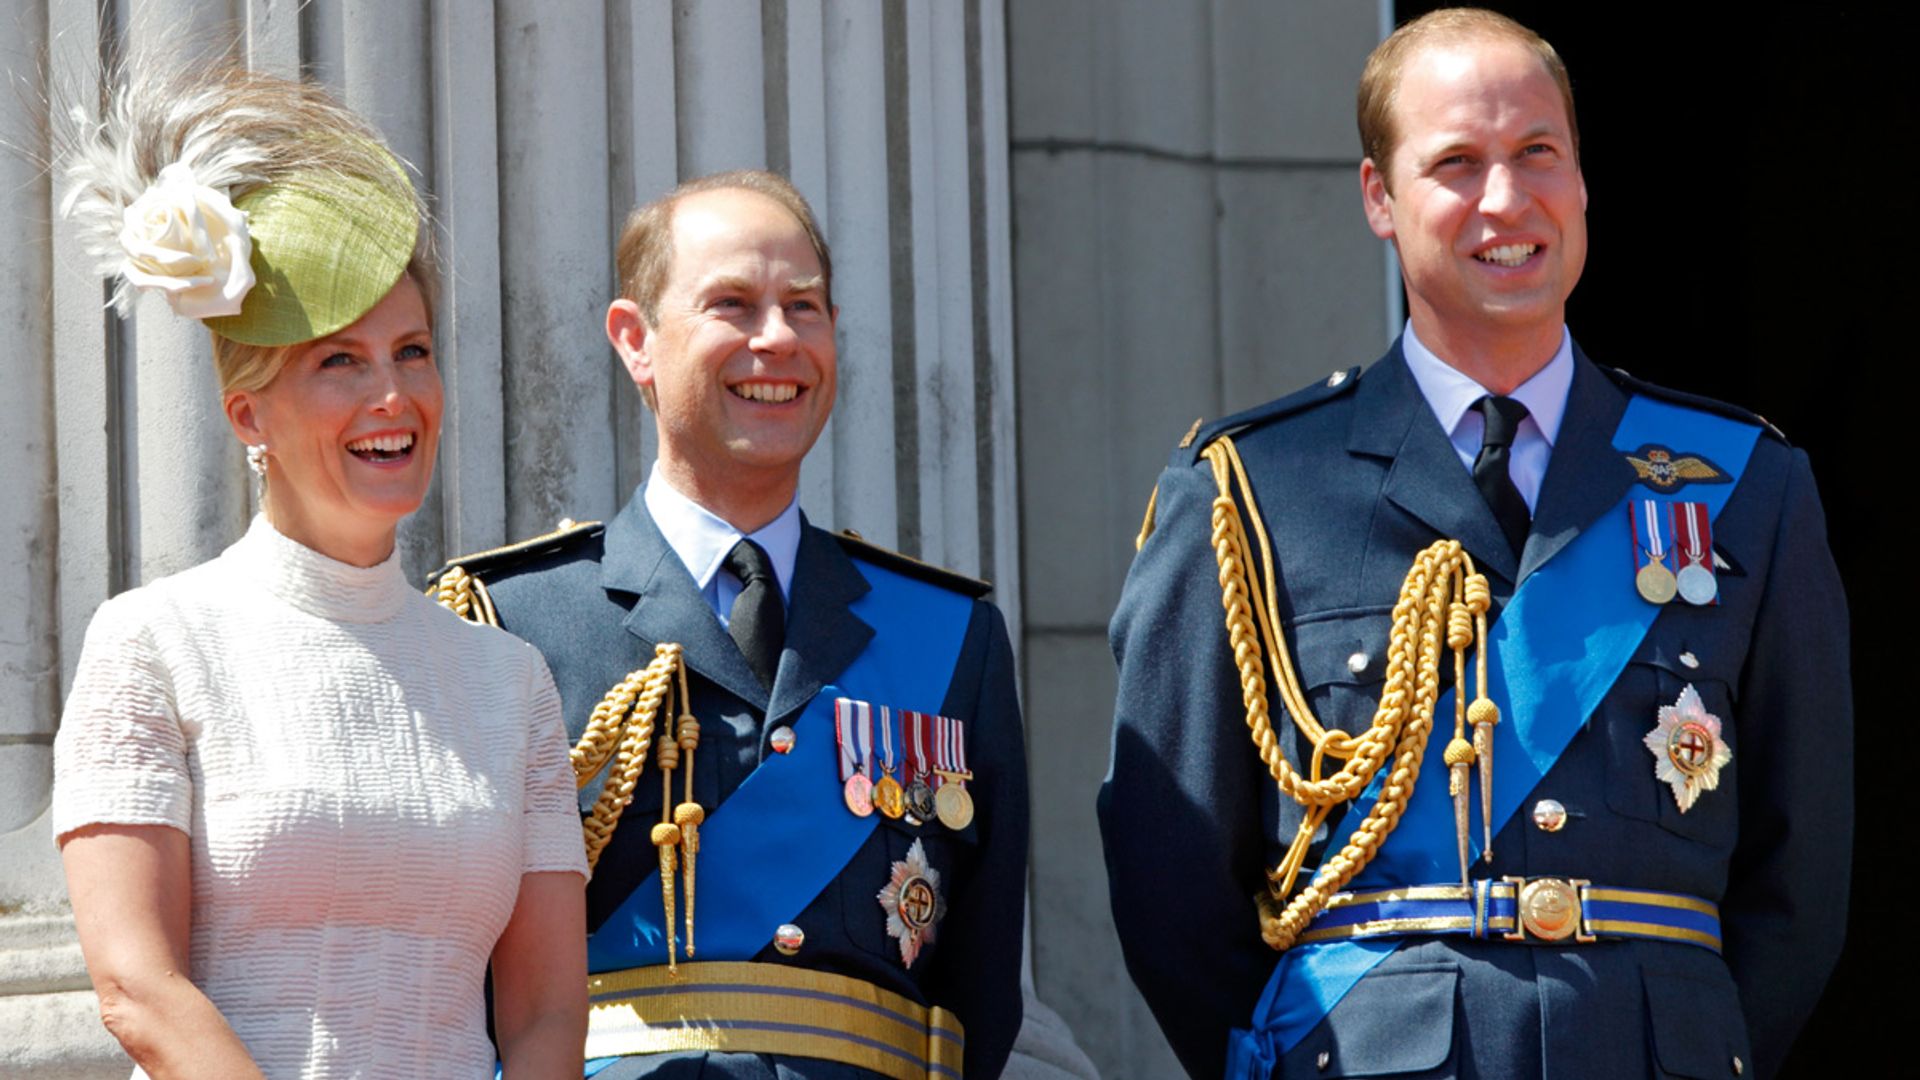 Prince Edward looks like Prince William's twin in new video - royal fans react